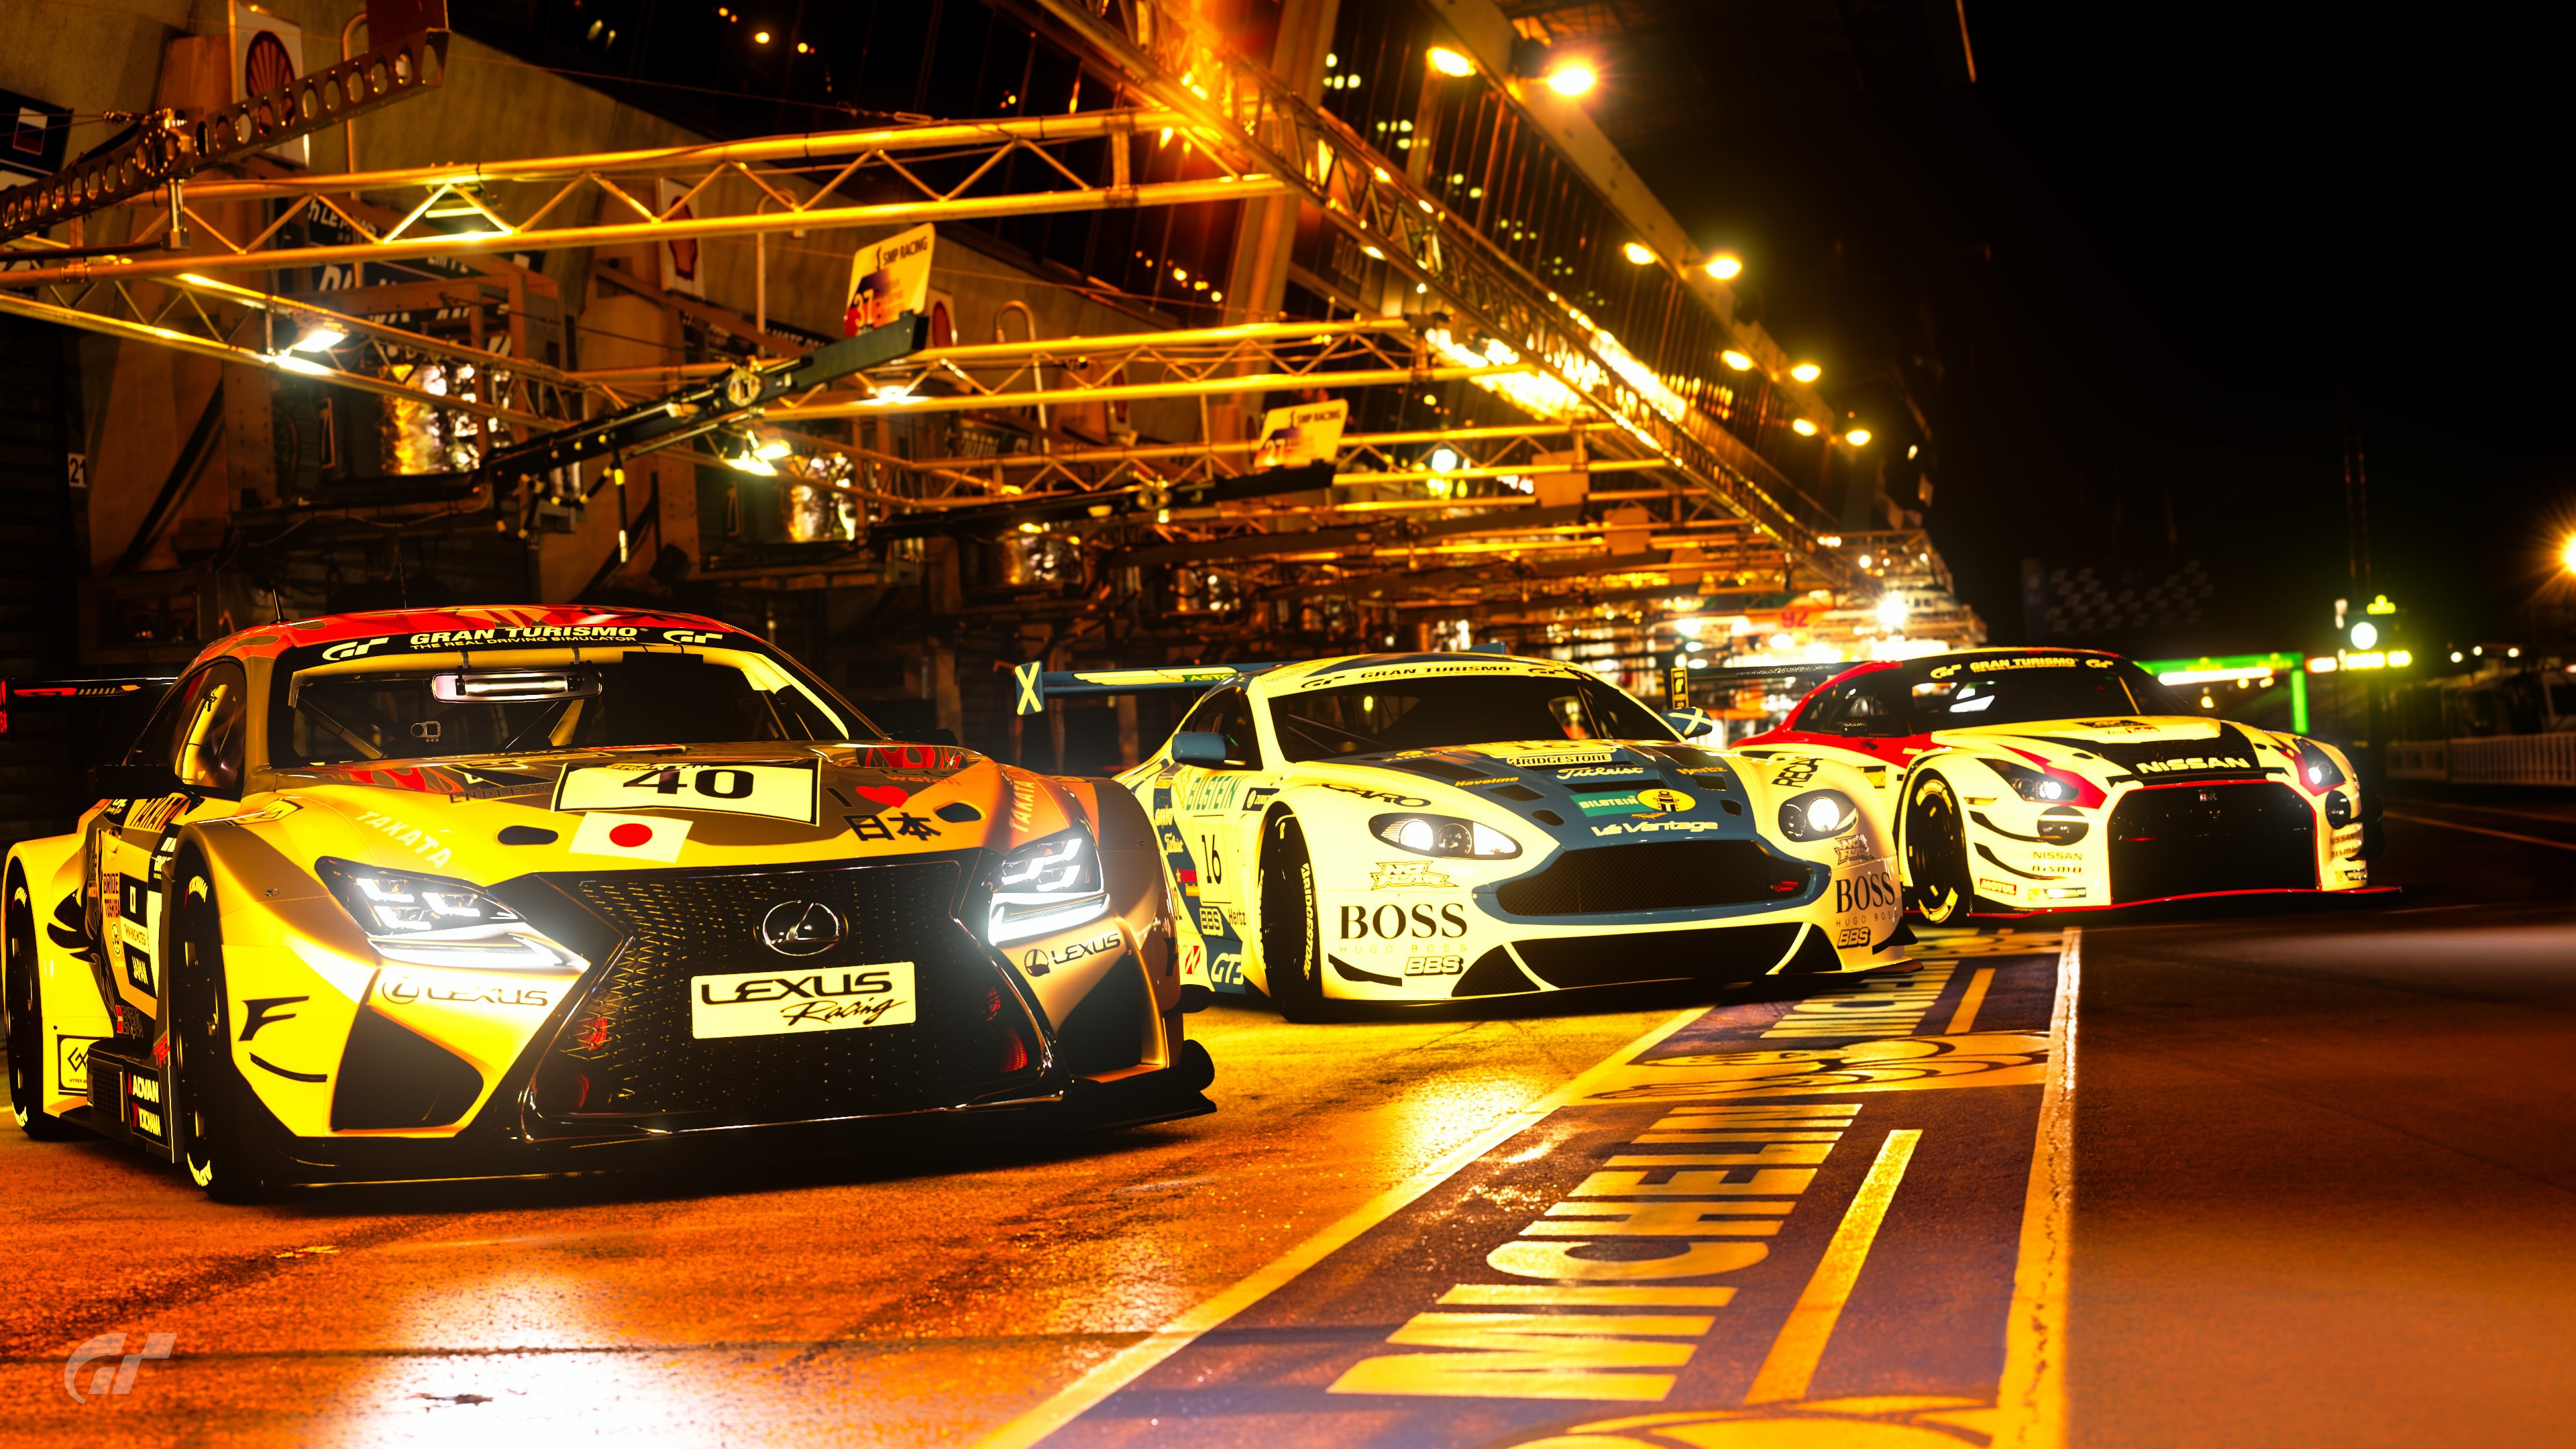 The Le Mans lineup tonight